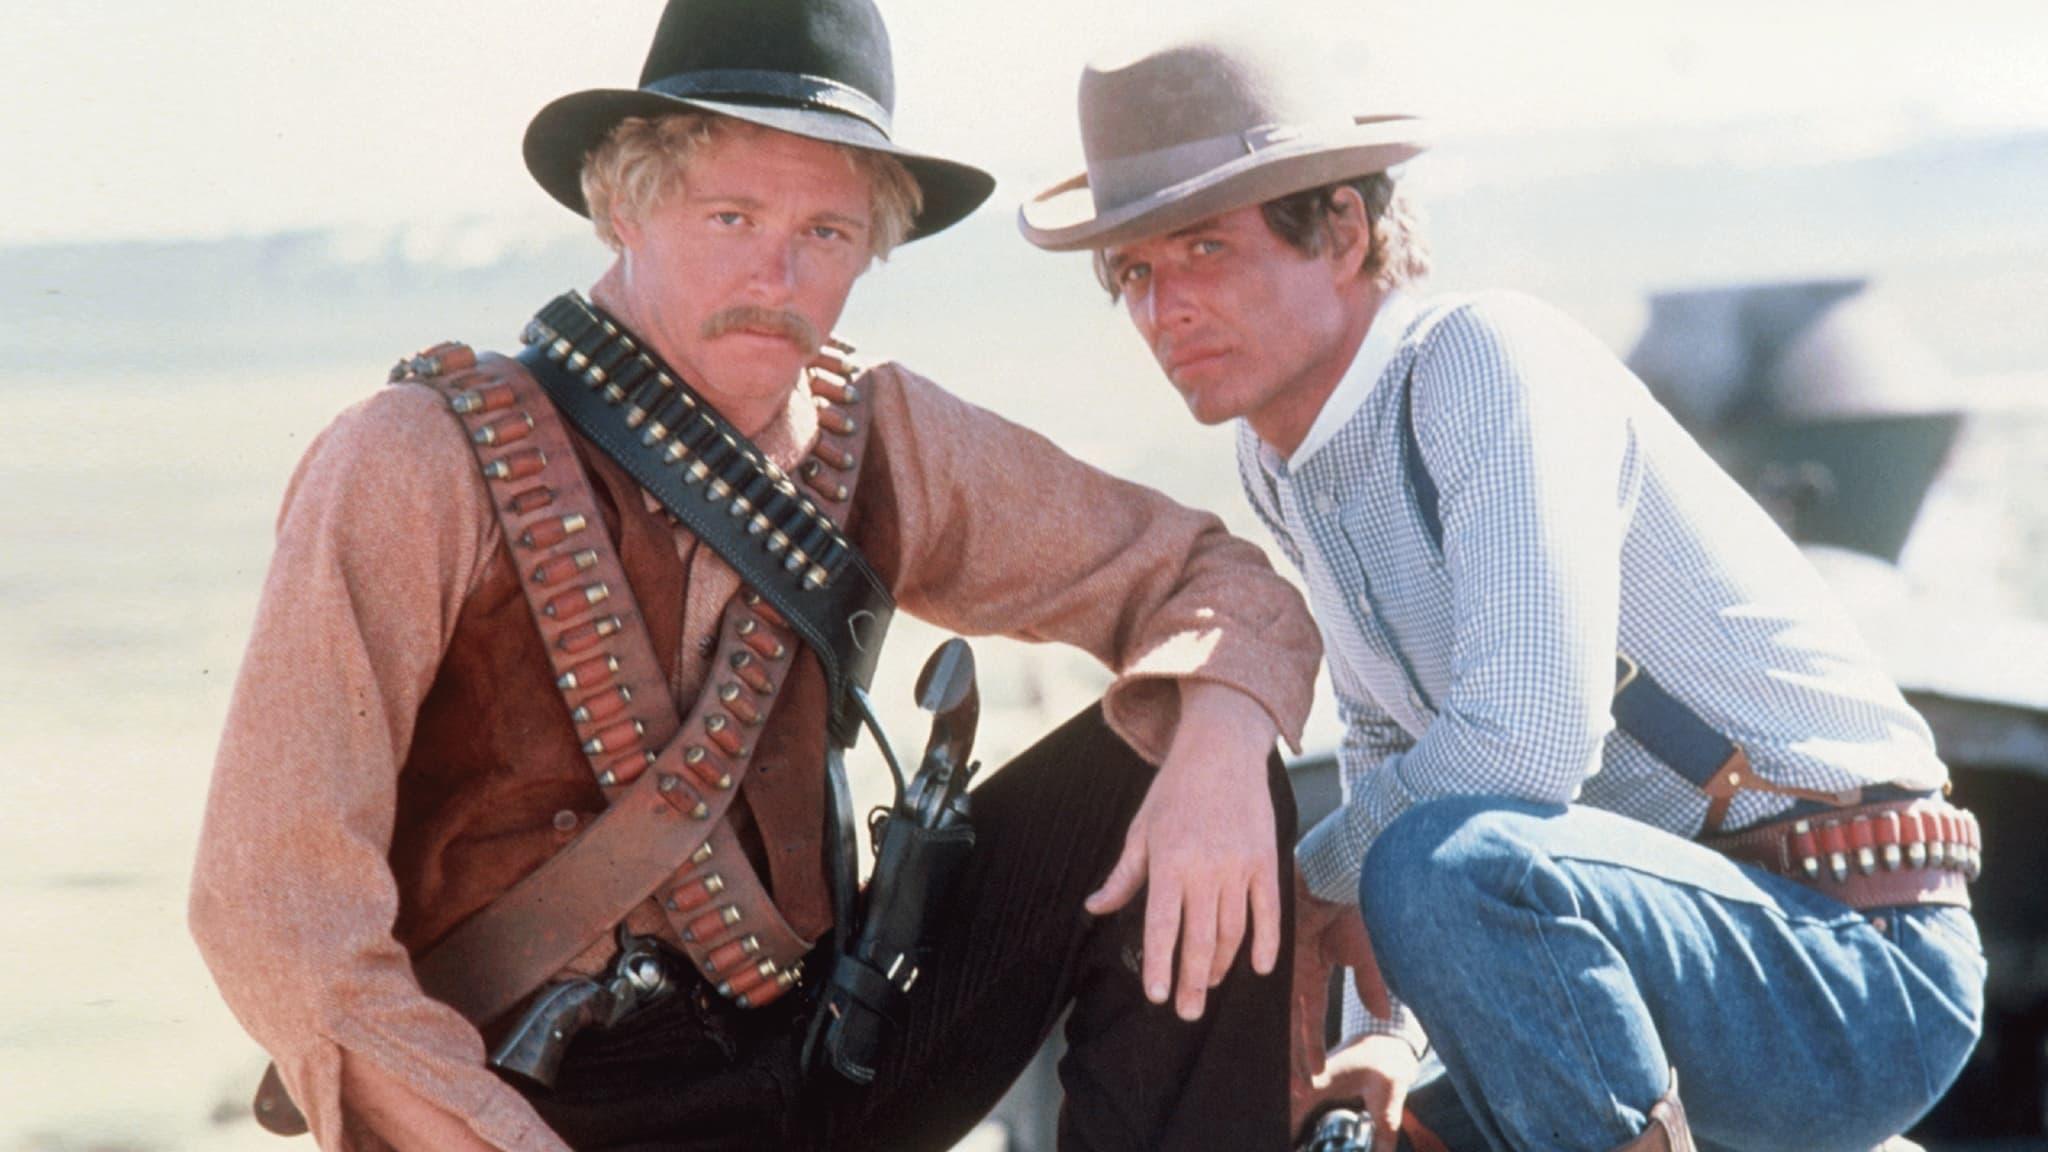 Butch and Sundance: The Early Days backdrop